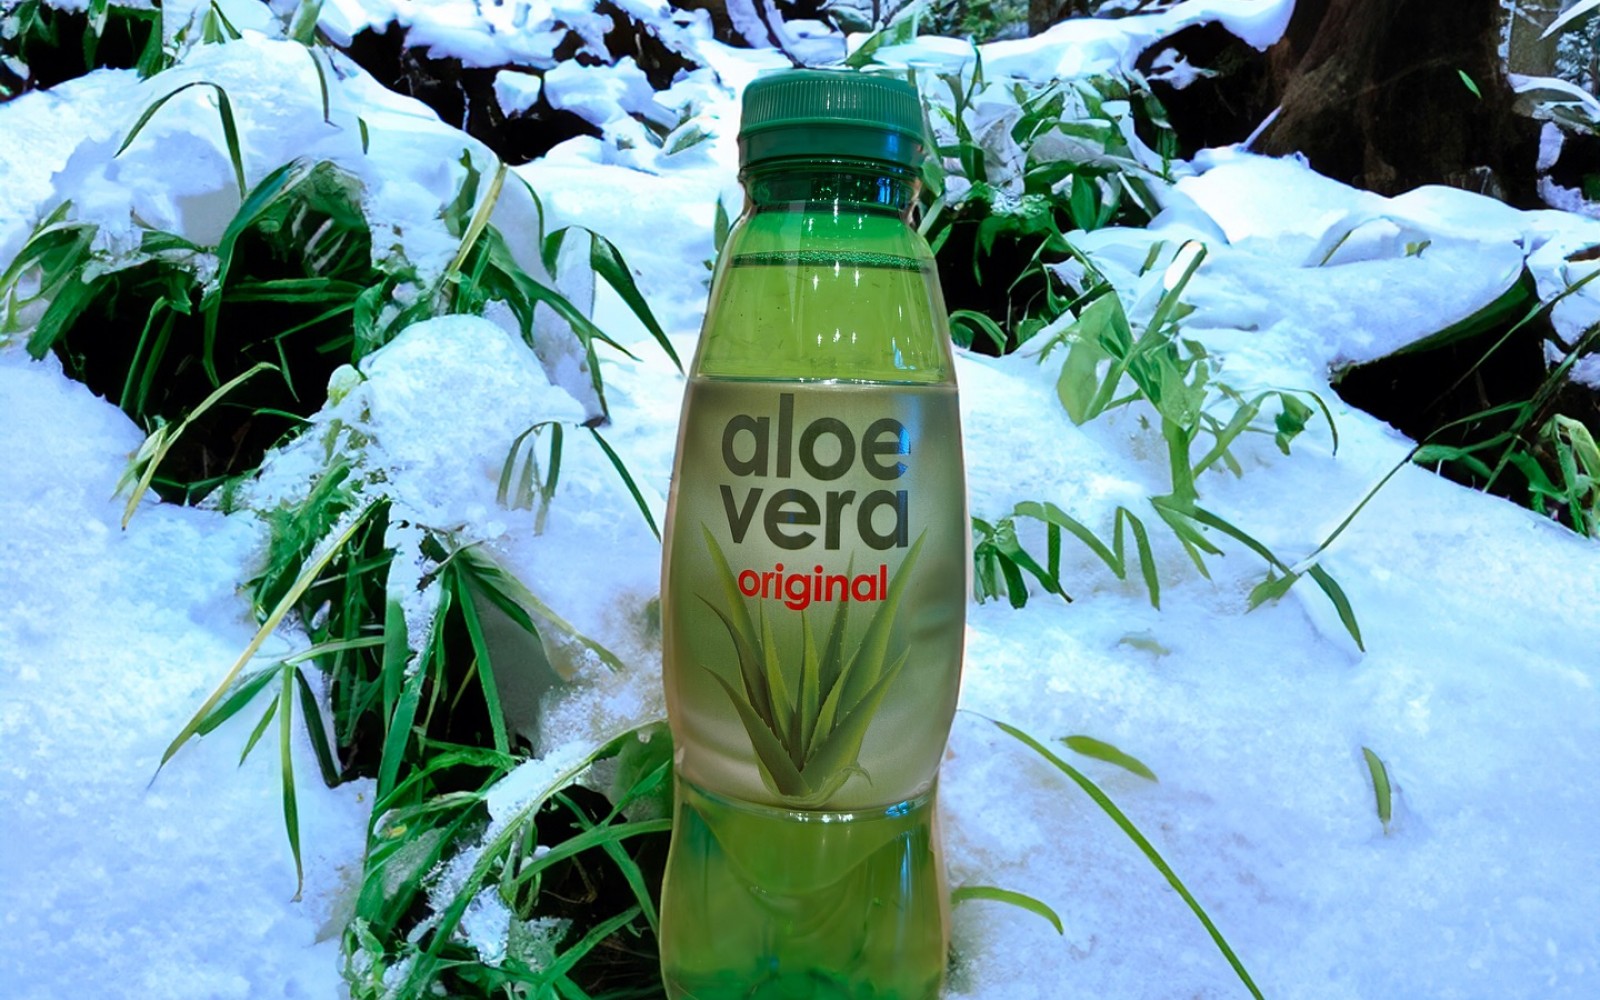 Supporting your immune system, an aloe vera drink can have many health benefits!